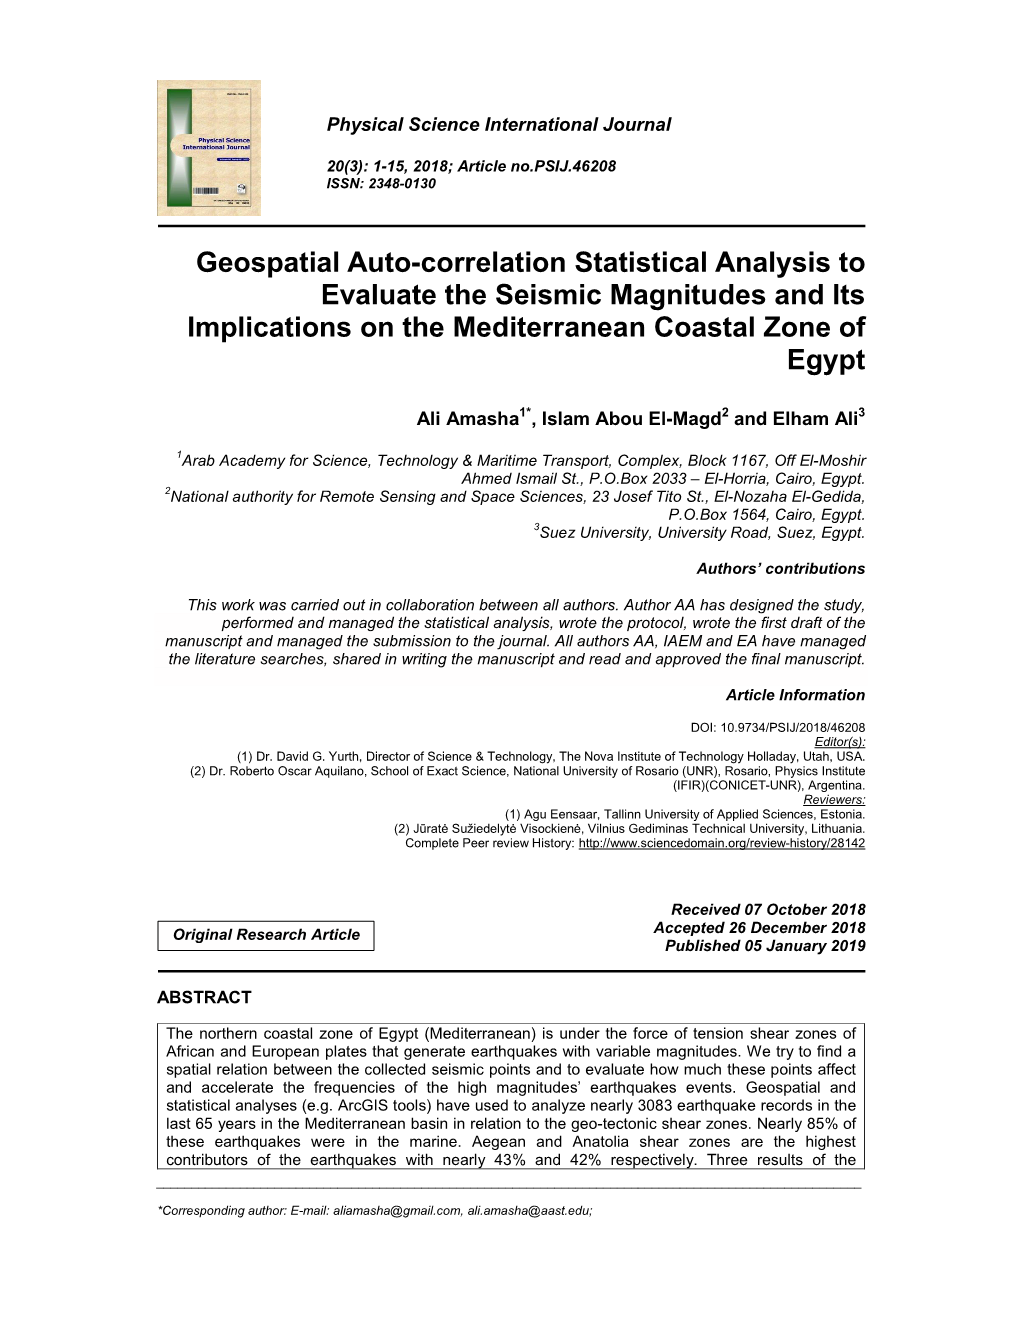 Geospatial Auto-Correlation Statistical Analysis to Evaluate the Seismic Magnitudes and Its Implications on the Mediterranean Coastal Zone of Egypt